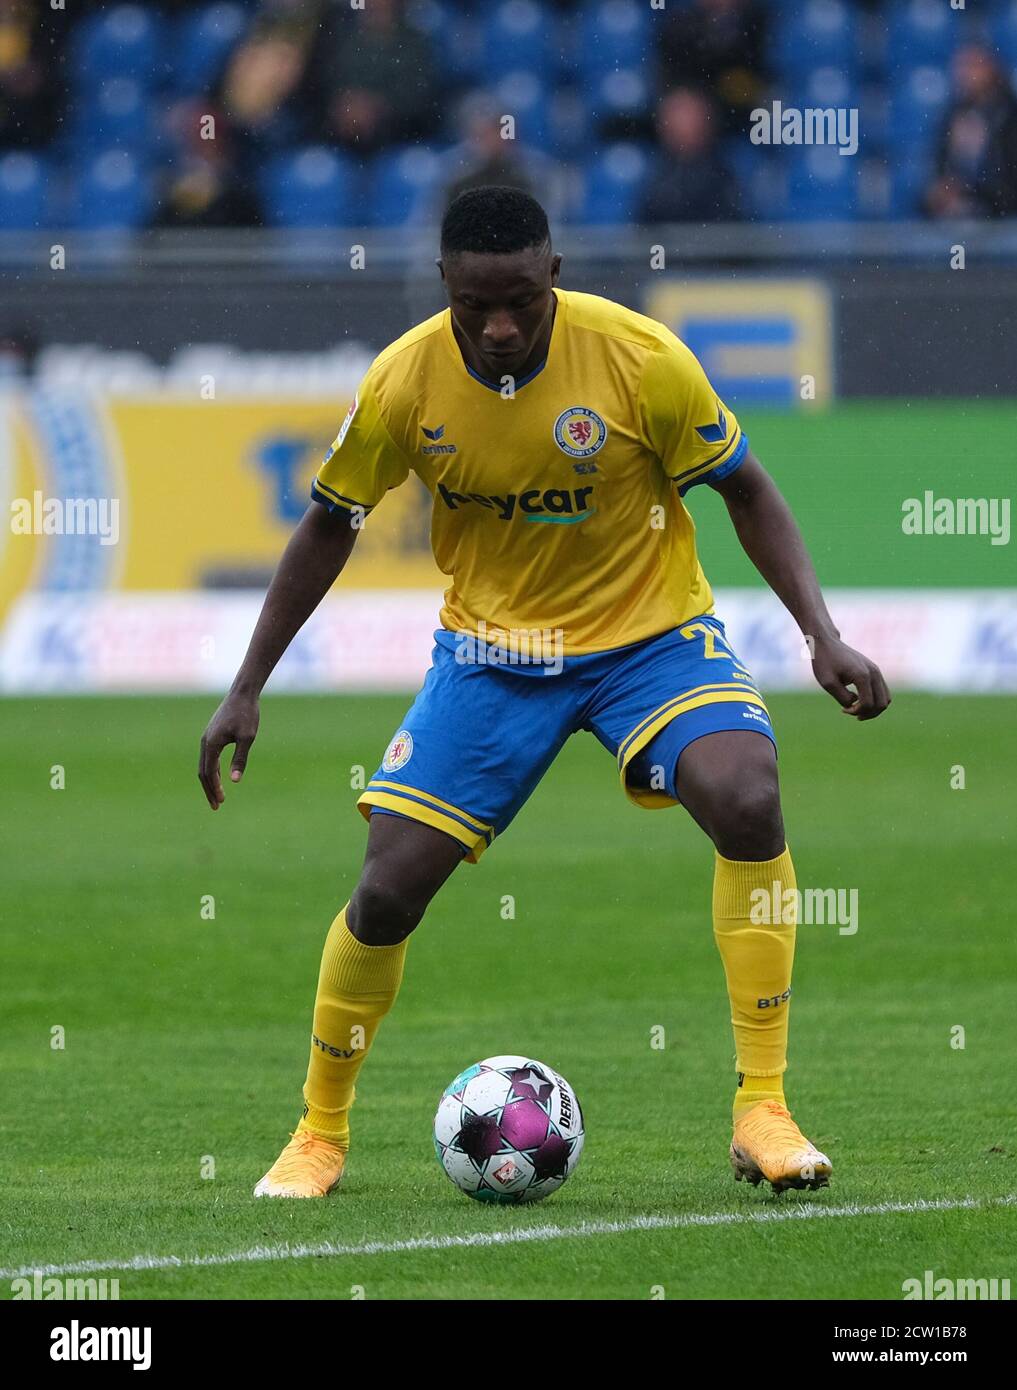 Brunswick, Germany. 26th Sep, 2020. Football: 2nd Bundesliga, Eintracht Braunschweig - Holstein Kiel, 2nd matchday at the Eintracht stadium. Brunswick's Suleiman Abdullahi is on the ball. Credit: Peter Steffen/dpa - IMPORTANT NOTE: In accordance with the regulations of the DFL Deutsche Fußball Liga and the DFB Deutscher Fußball-Bund, it is prohibited to exploit or have exploited in the stadium and/or from the game taken photographs in the form of sequence images and/or video-like photo series./dpa/Alamy Live News Stock Photo